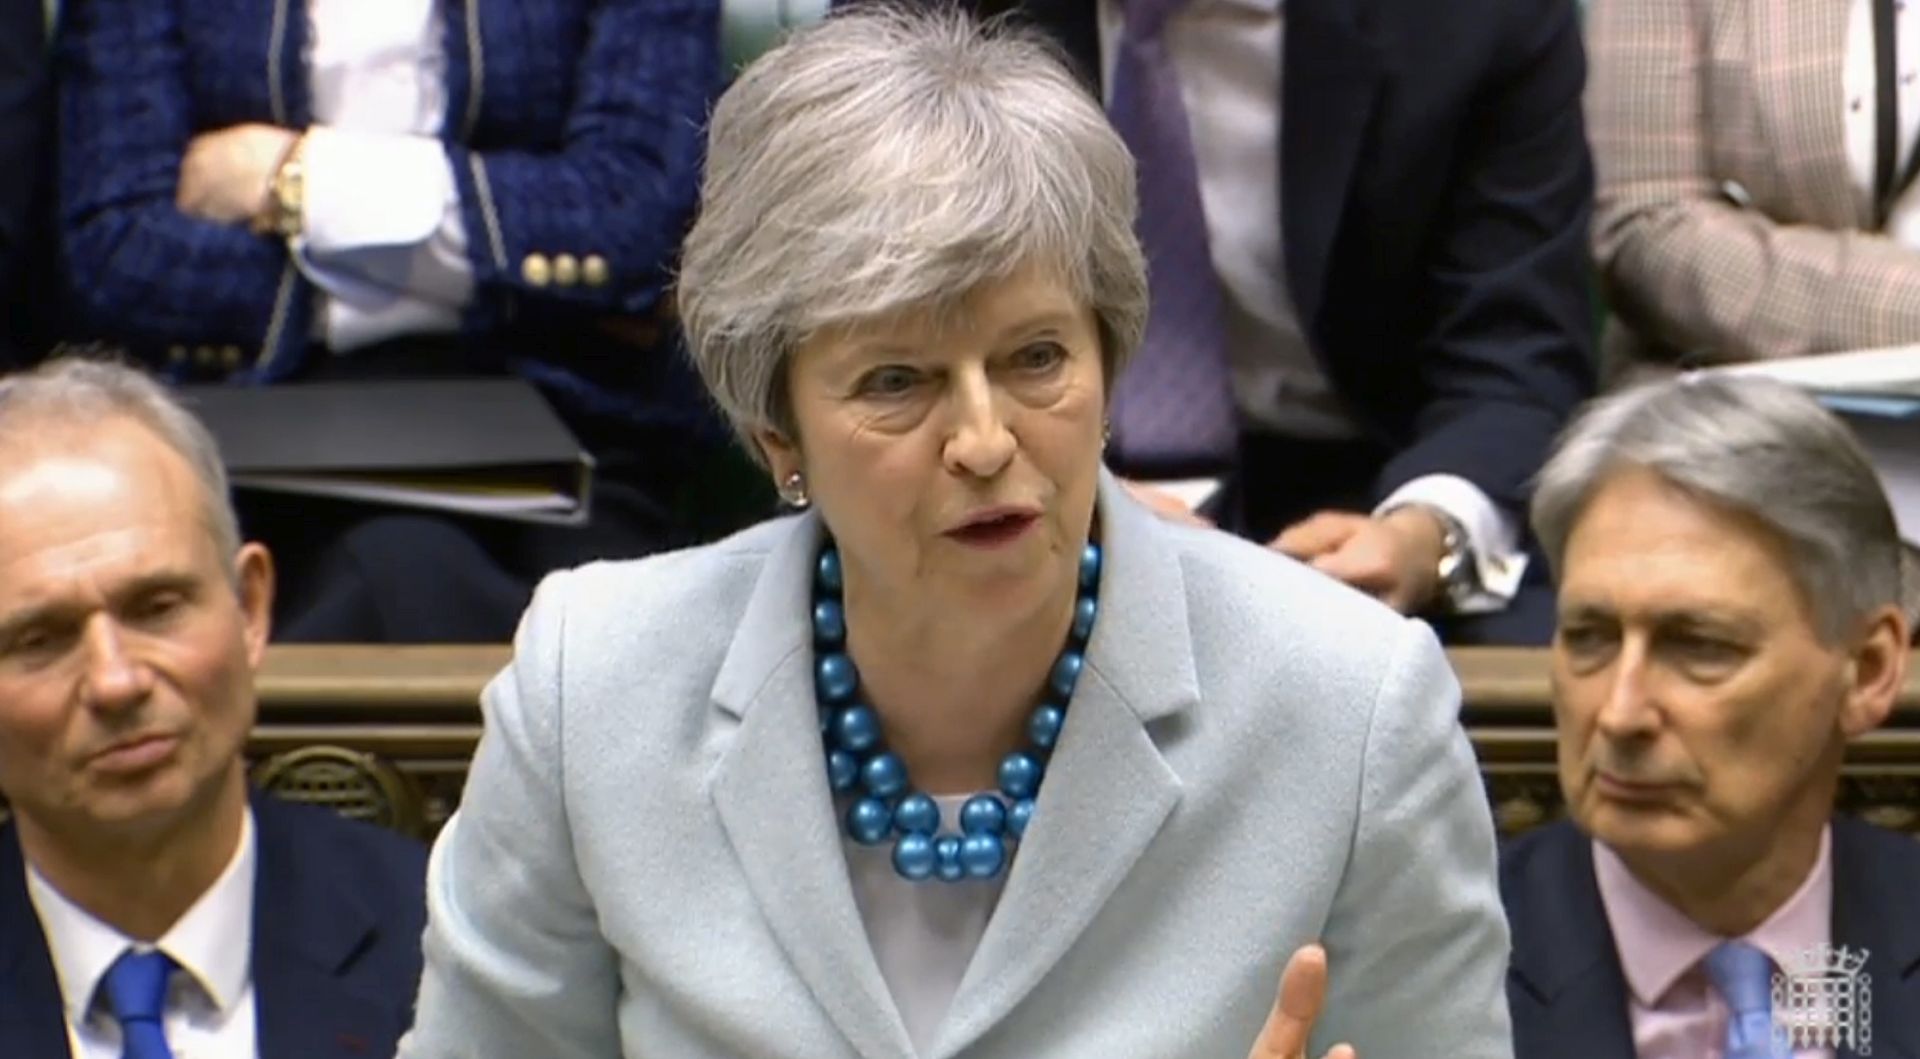 epa07462685 A grab from a handout video made available by the UK Parliamentary Recording Unit shows British Prime Minister Theresa May making a statement on Brexit to the British House of Commons, in Westminster, central London, Britain, 25 March 2019. Reports state that Theresa May updated ministers on her Brexit strategy at a meeting of her cabinet earlier in the day which comes as the EU announced that its preparation for a no-deal scenario has been completed. Members of Parliament are expected to vote on a series of alternatives to the Prime Minister's Brexit deal.  EPA/UK PARLIAMENTARY RECORDING UNIT / HANDOUT MANDATORY CREDIT: UK PARLIAMENTARY RECORDING UNIT HANDOUT EDITORIAL USE ONLY/NO SALES